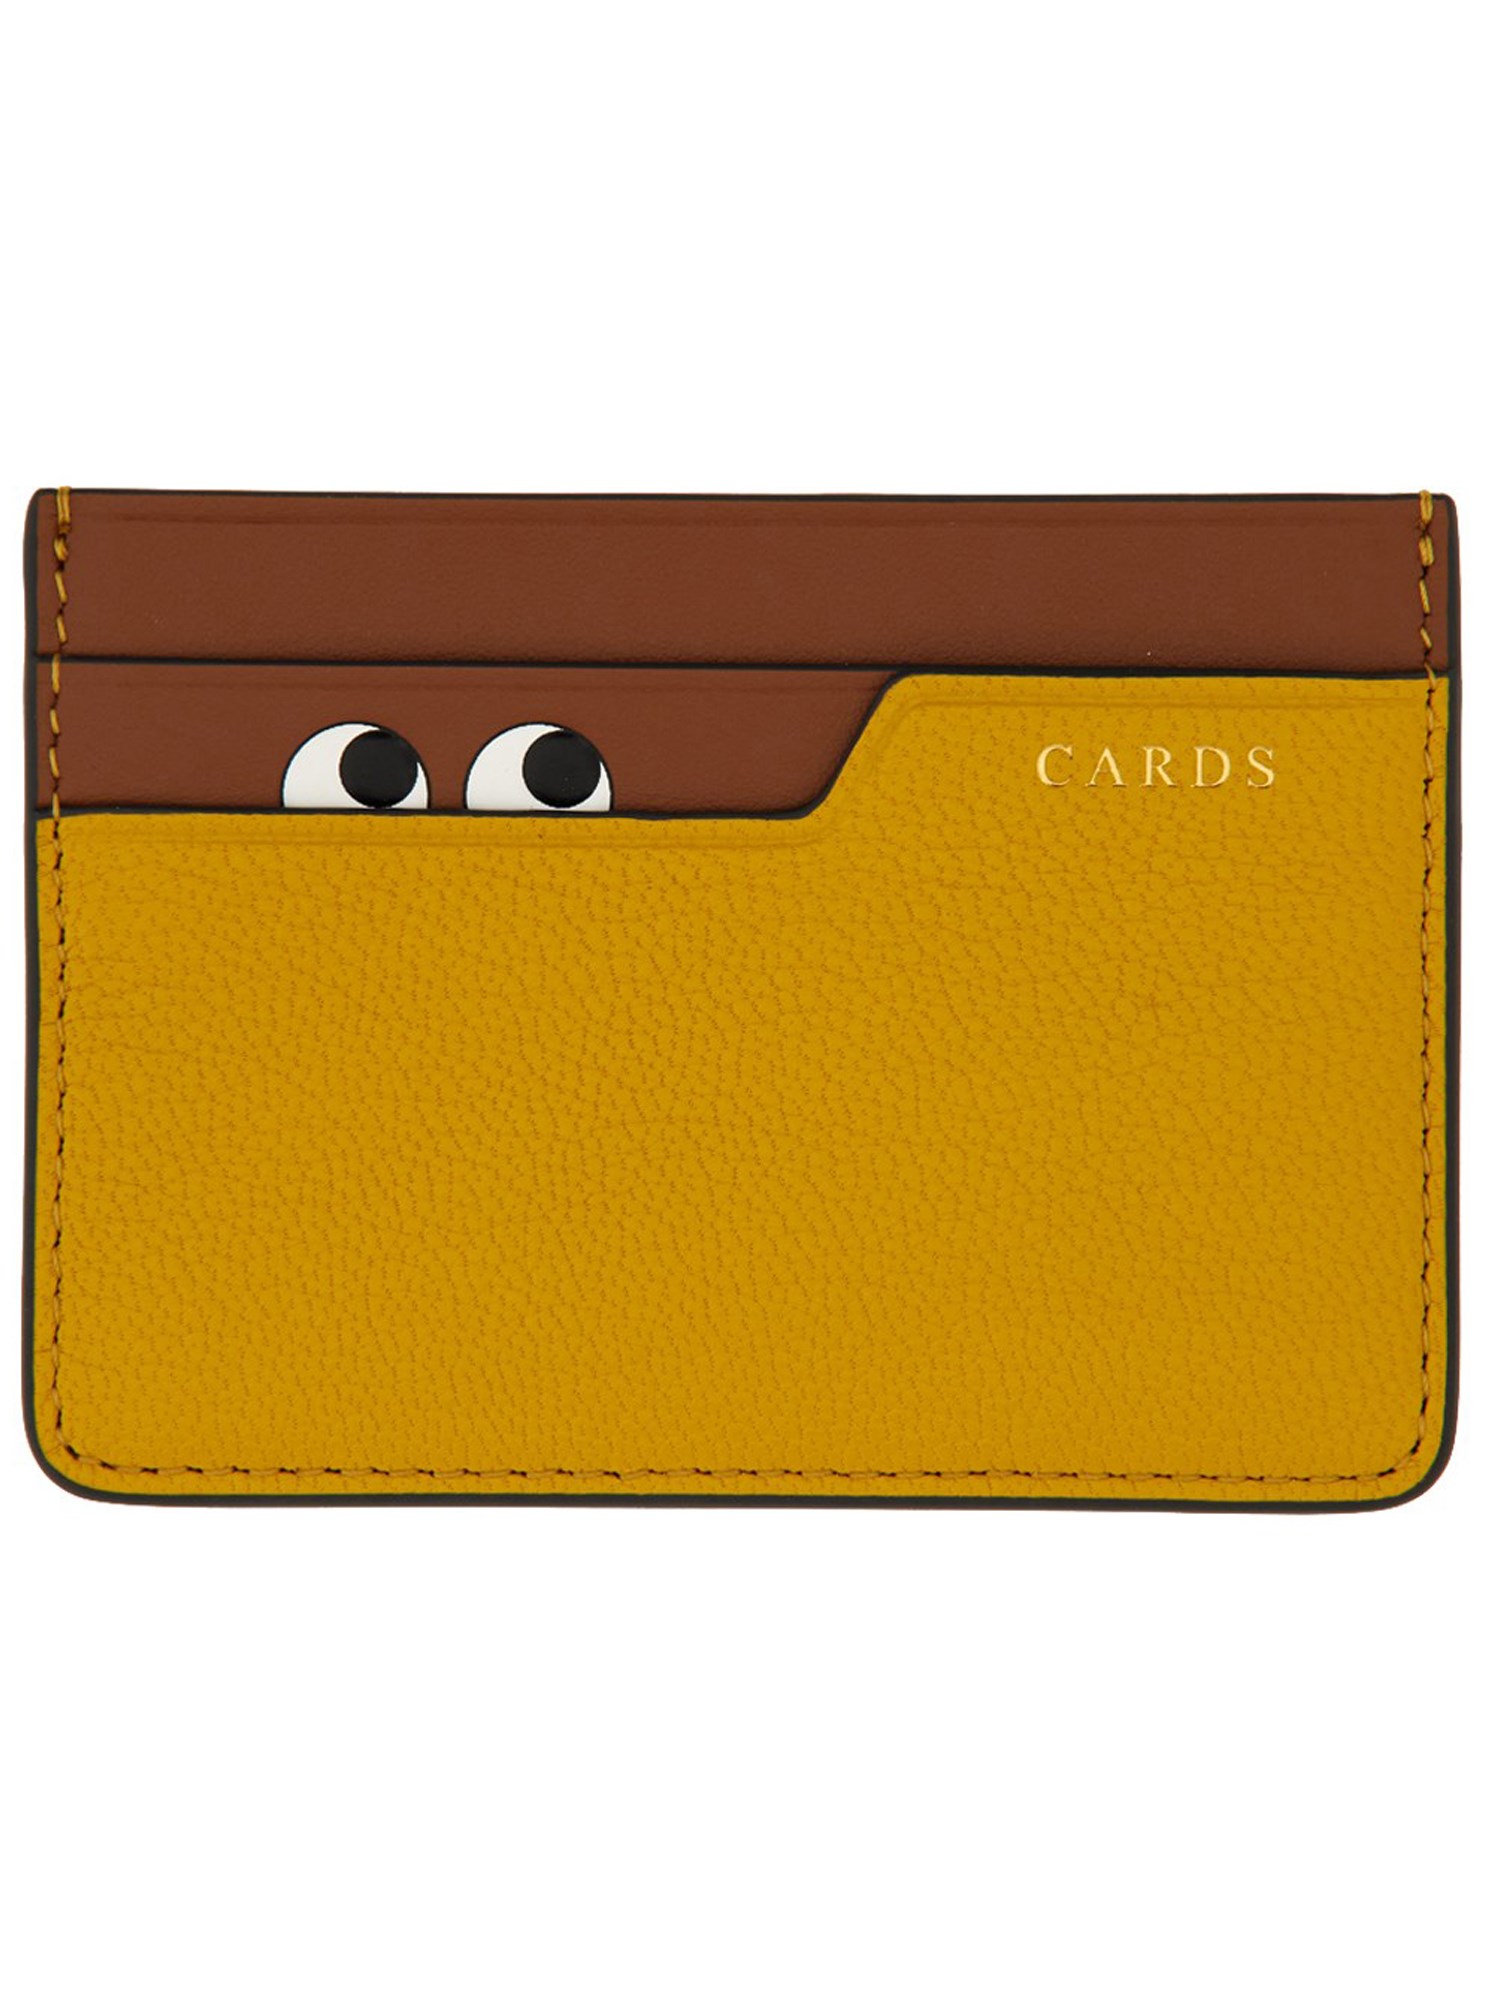 anya hindmarch leather card holder